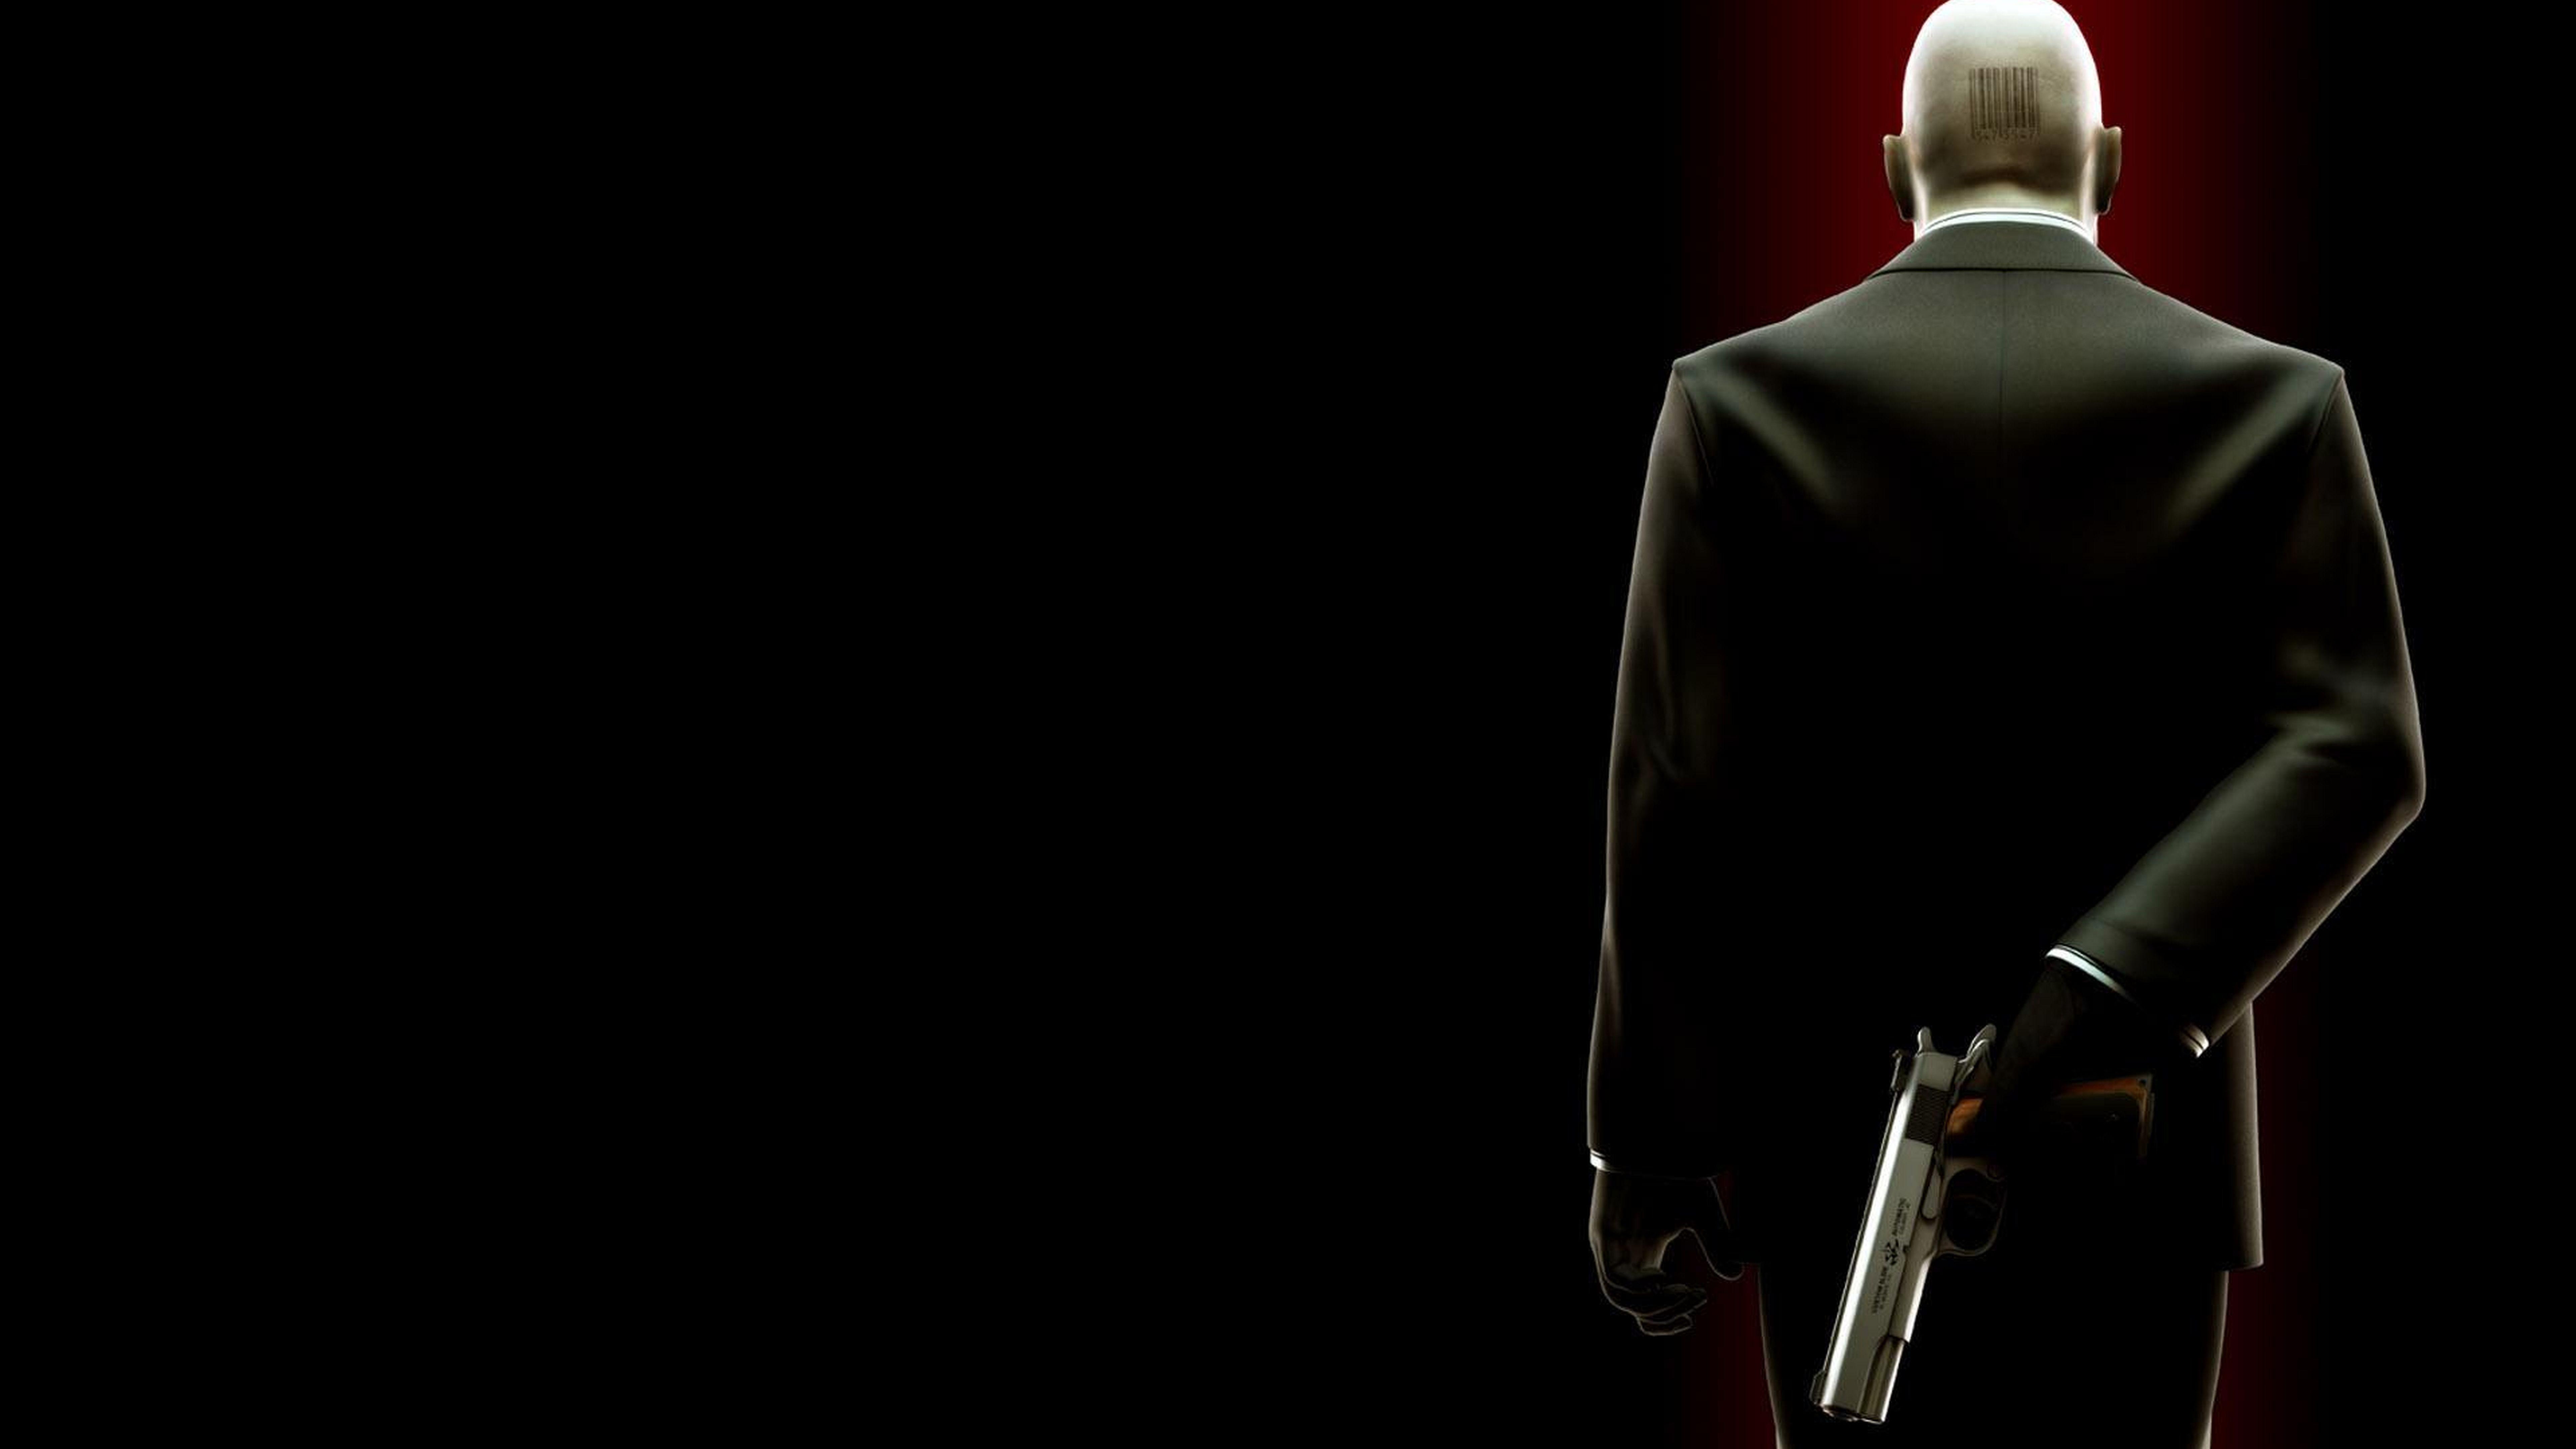 Hitman Game Wallpapers 69 images inside